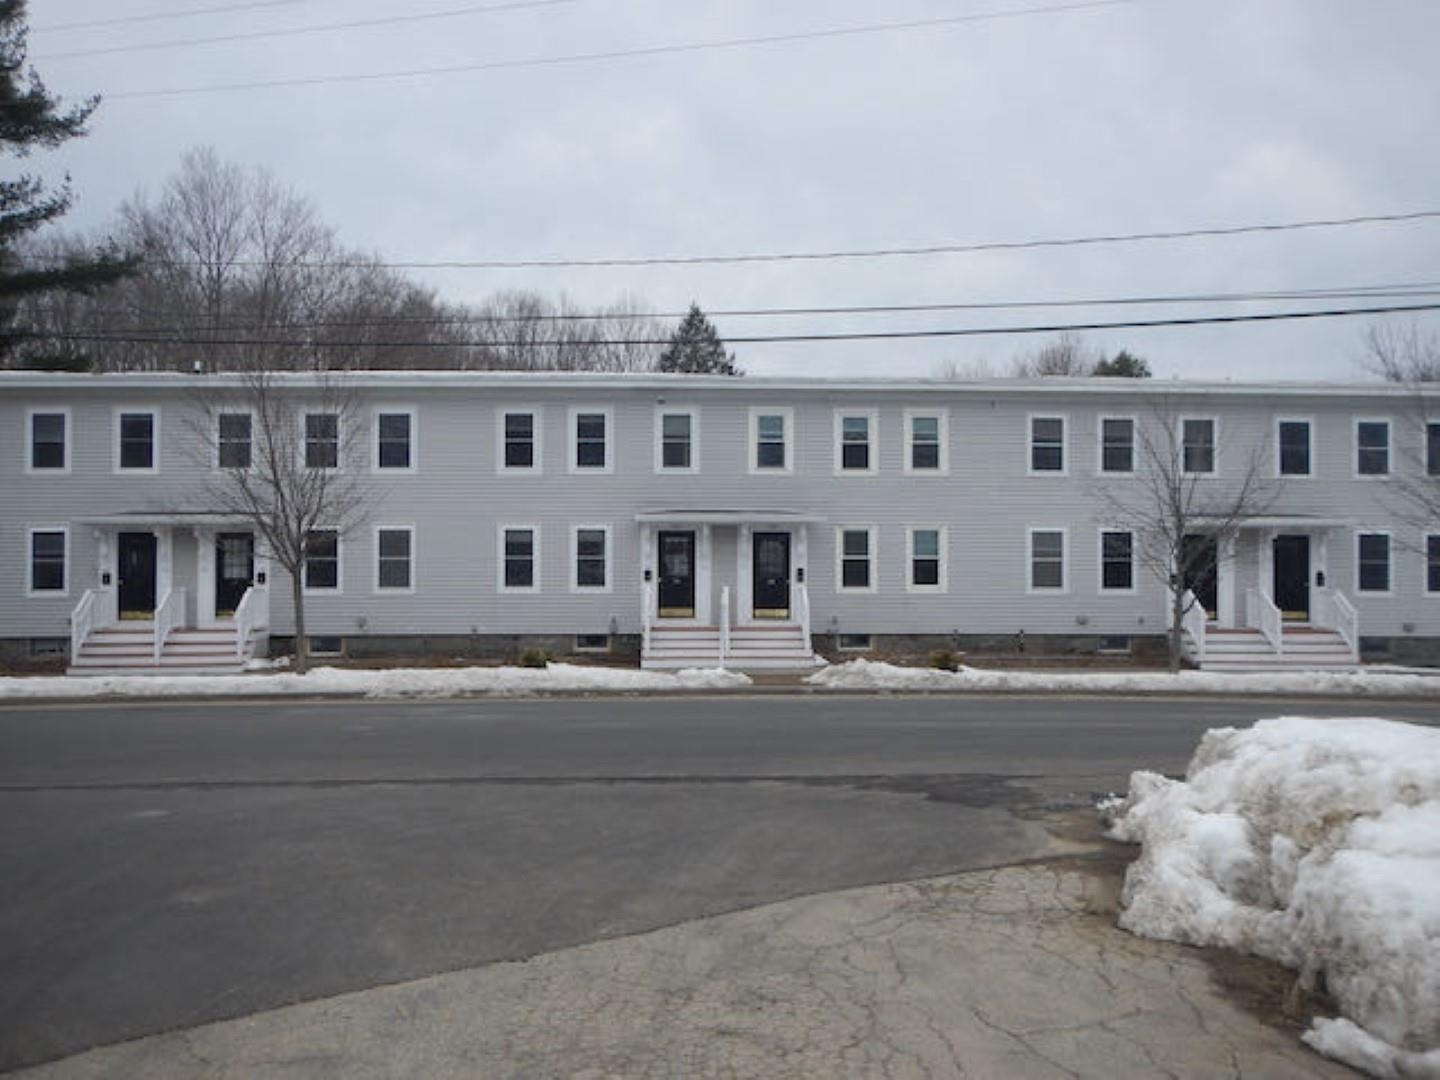 Photo of 10-20 Spring Street Newmarket NH 03857